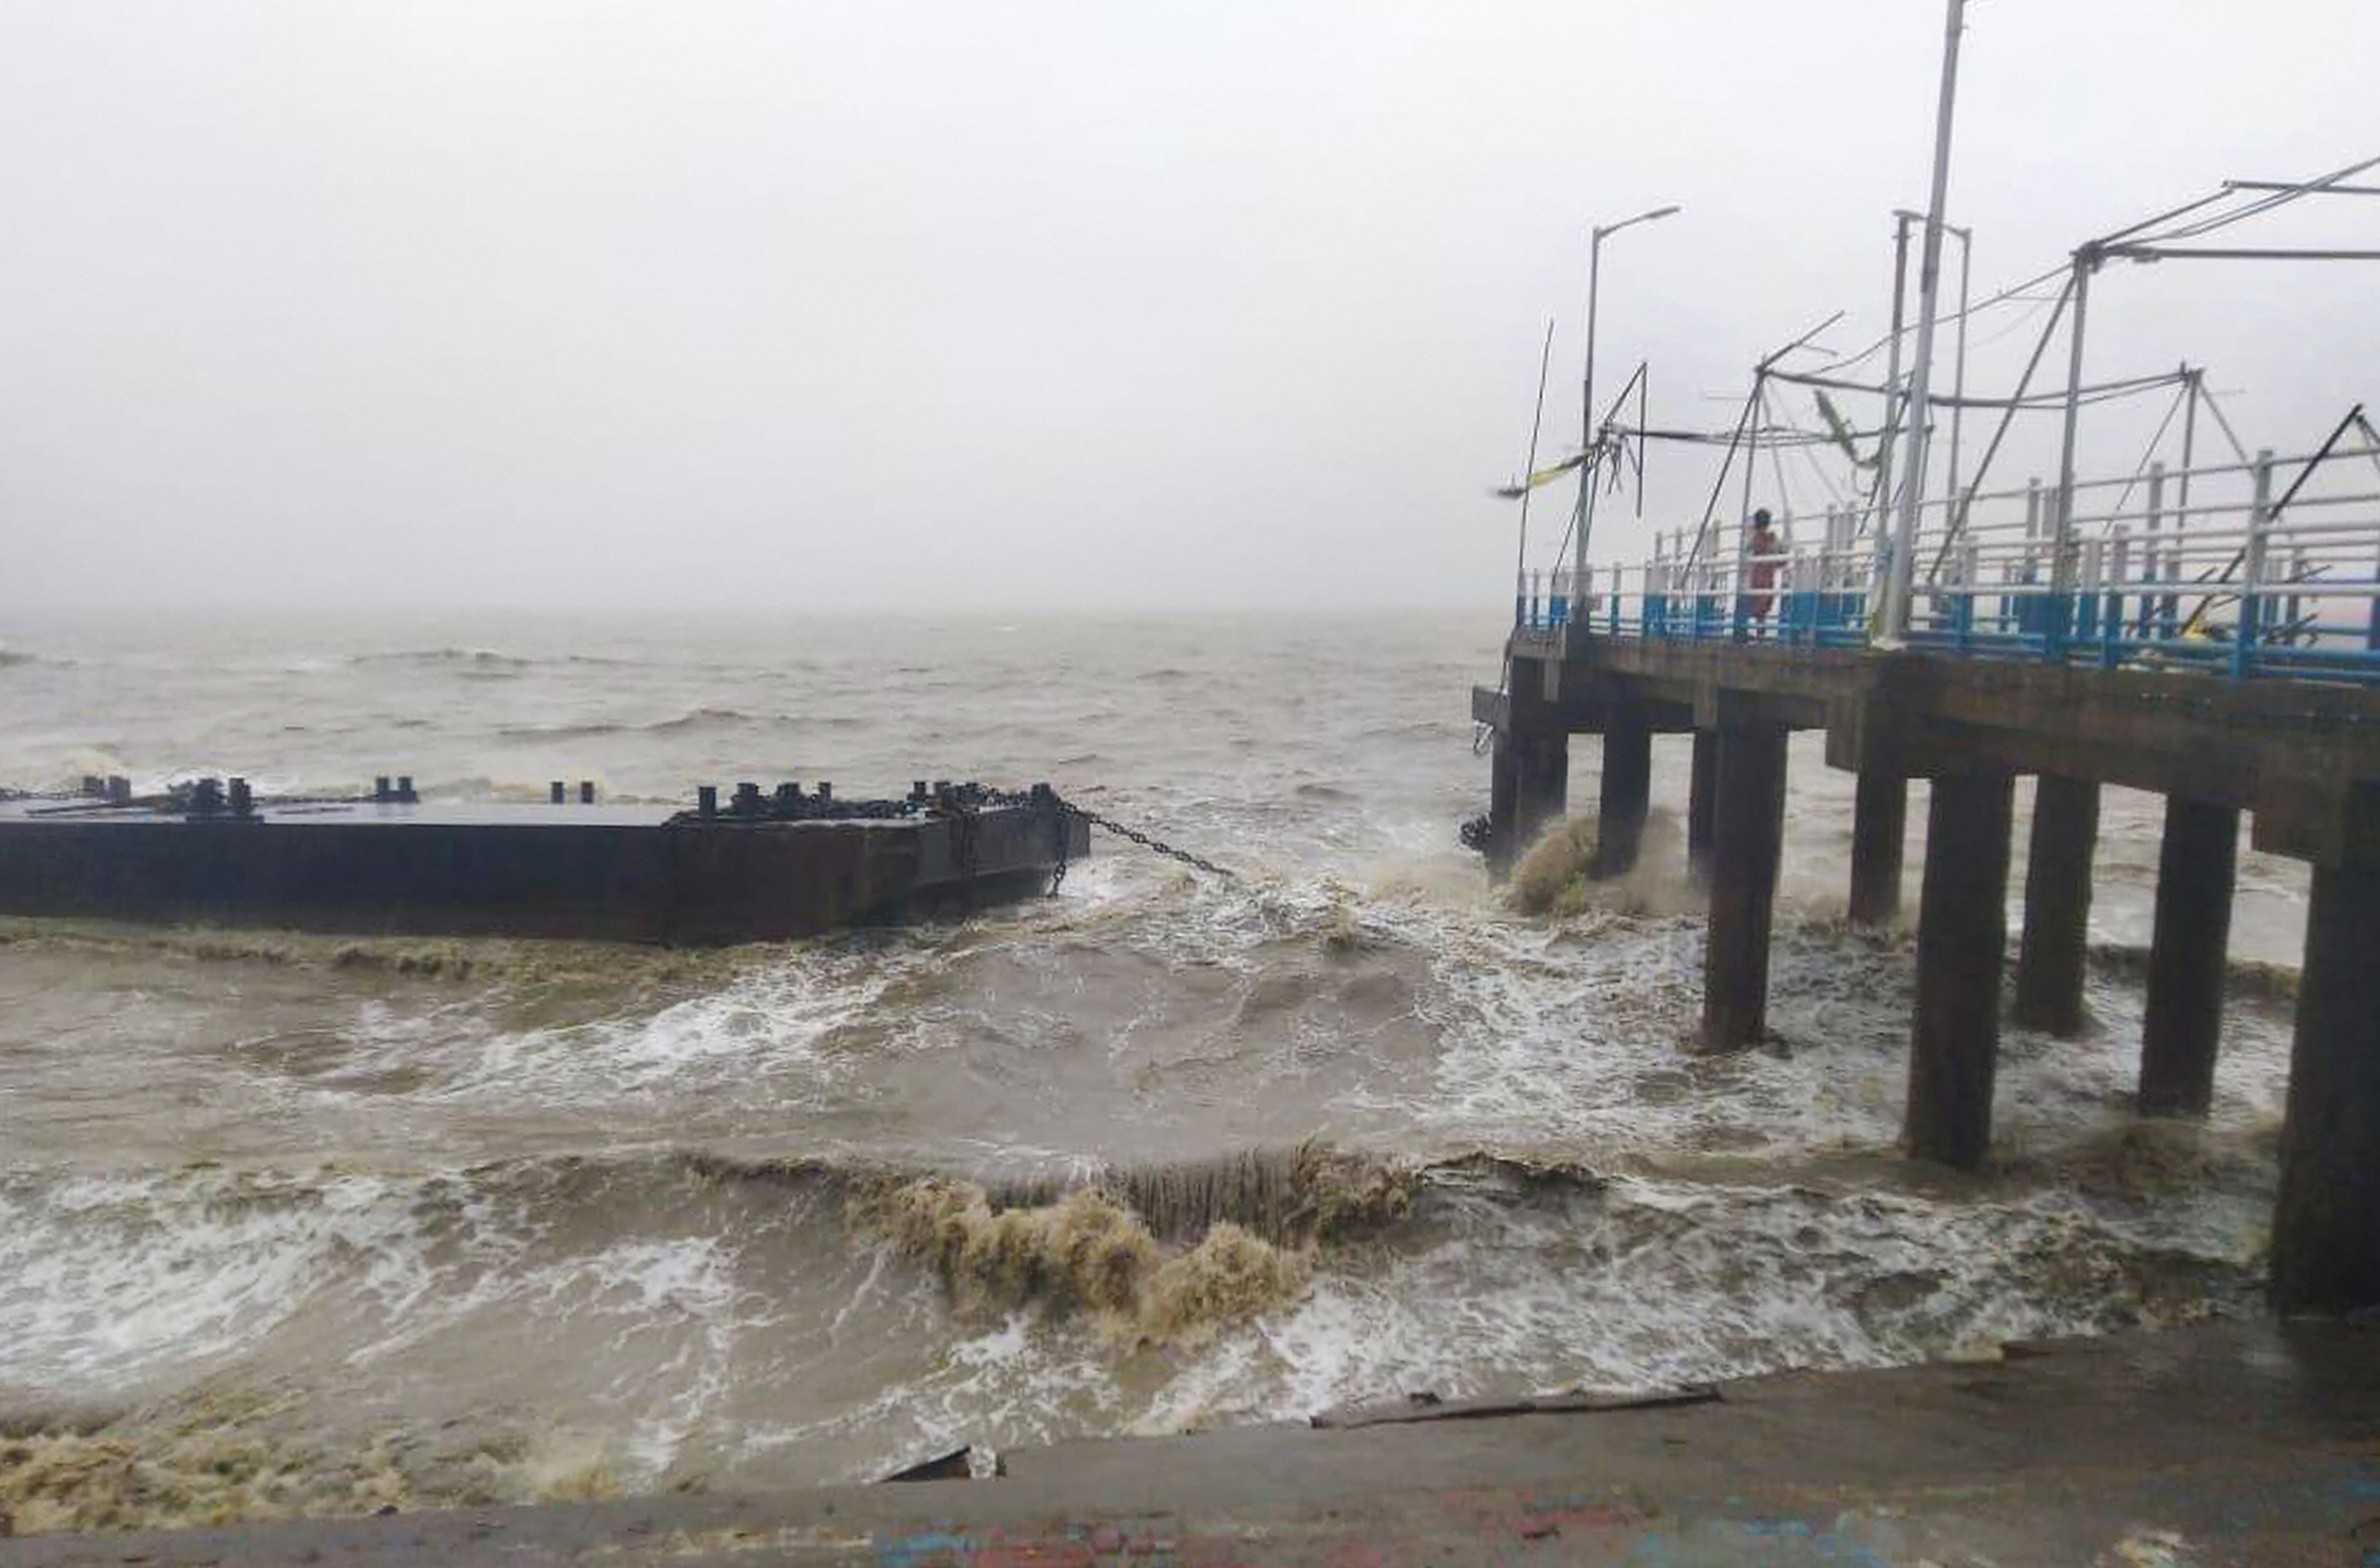 The Kachuberia jetty collapses at Bakkhali due to the impact of Cyclone Amphan, near Sunderbans area in South 24 Parganas district, on Wednesday.